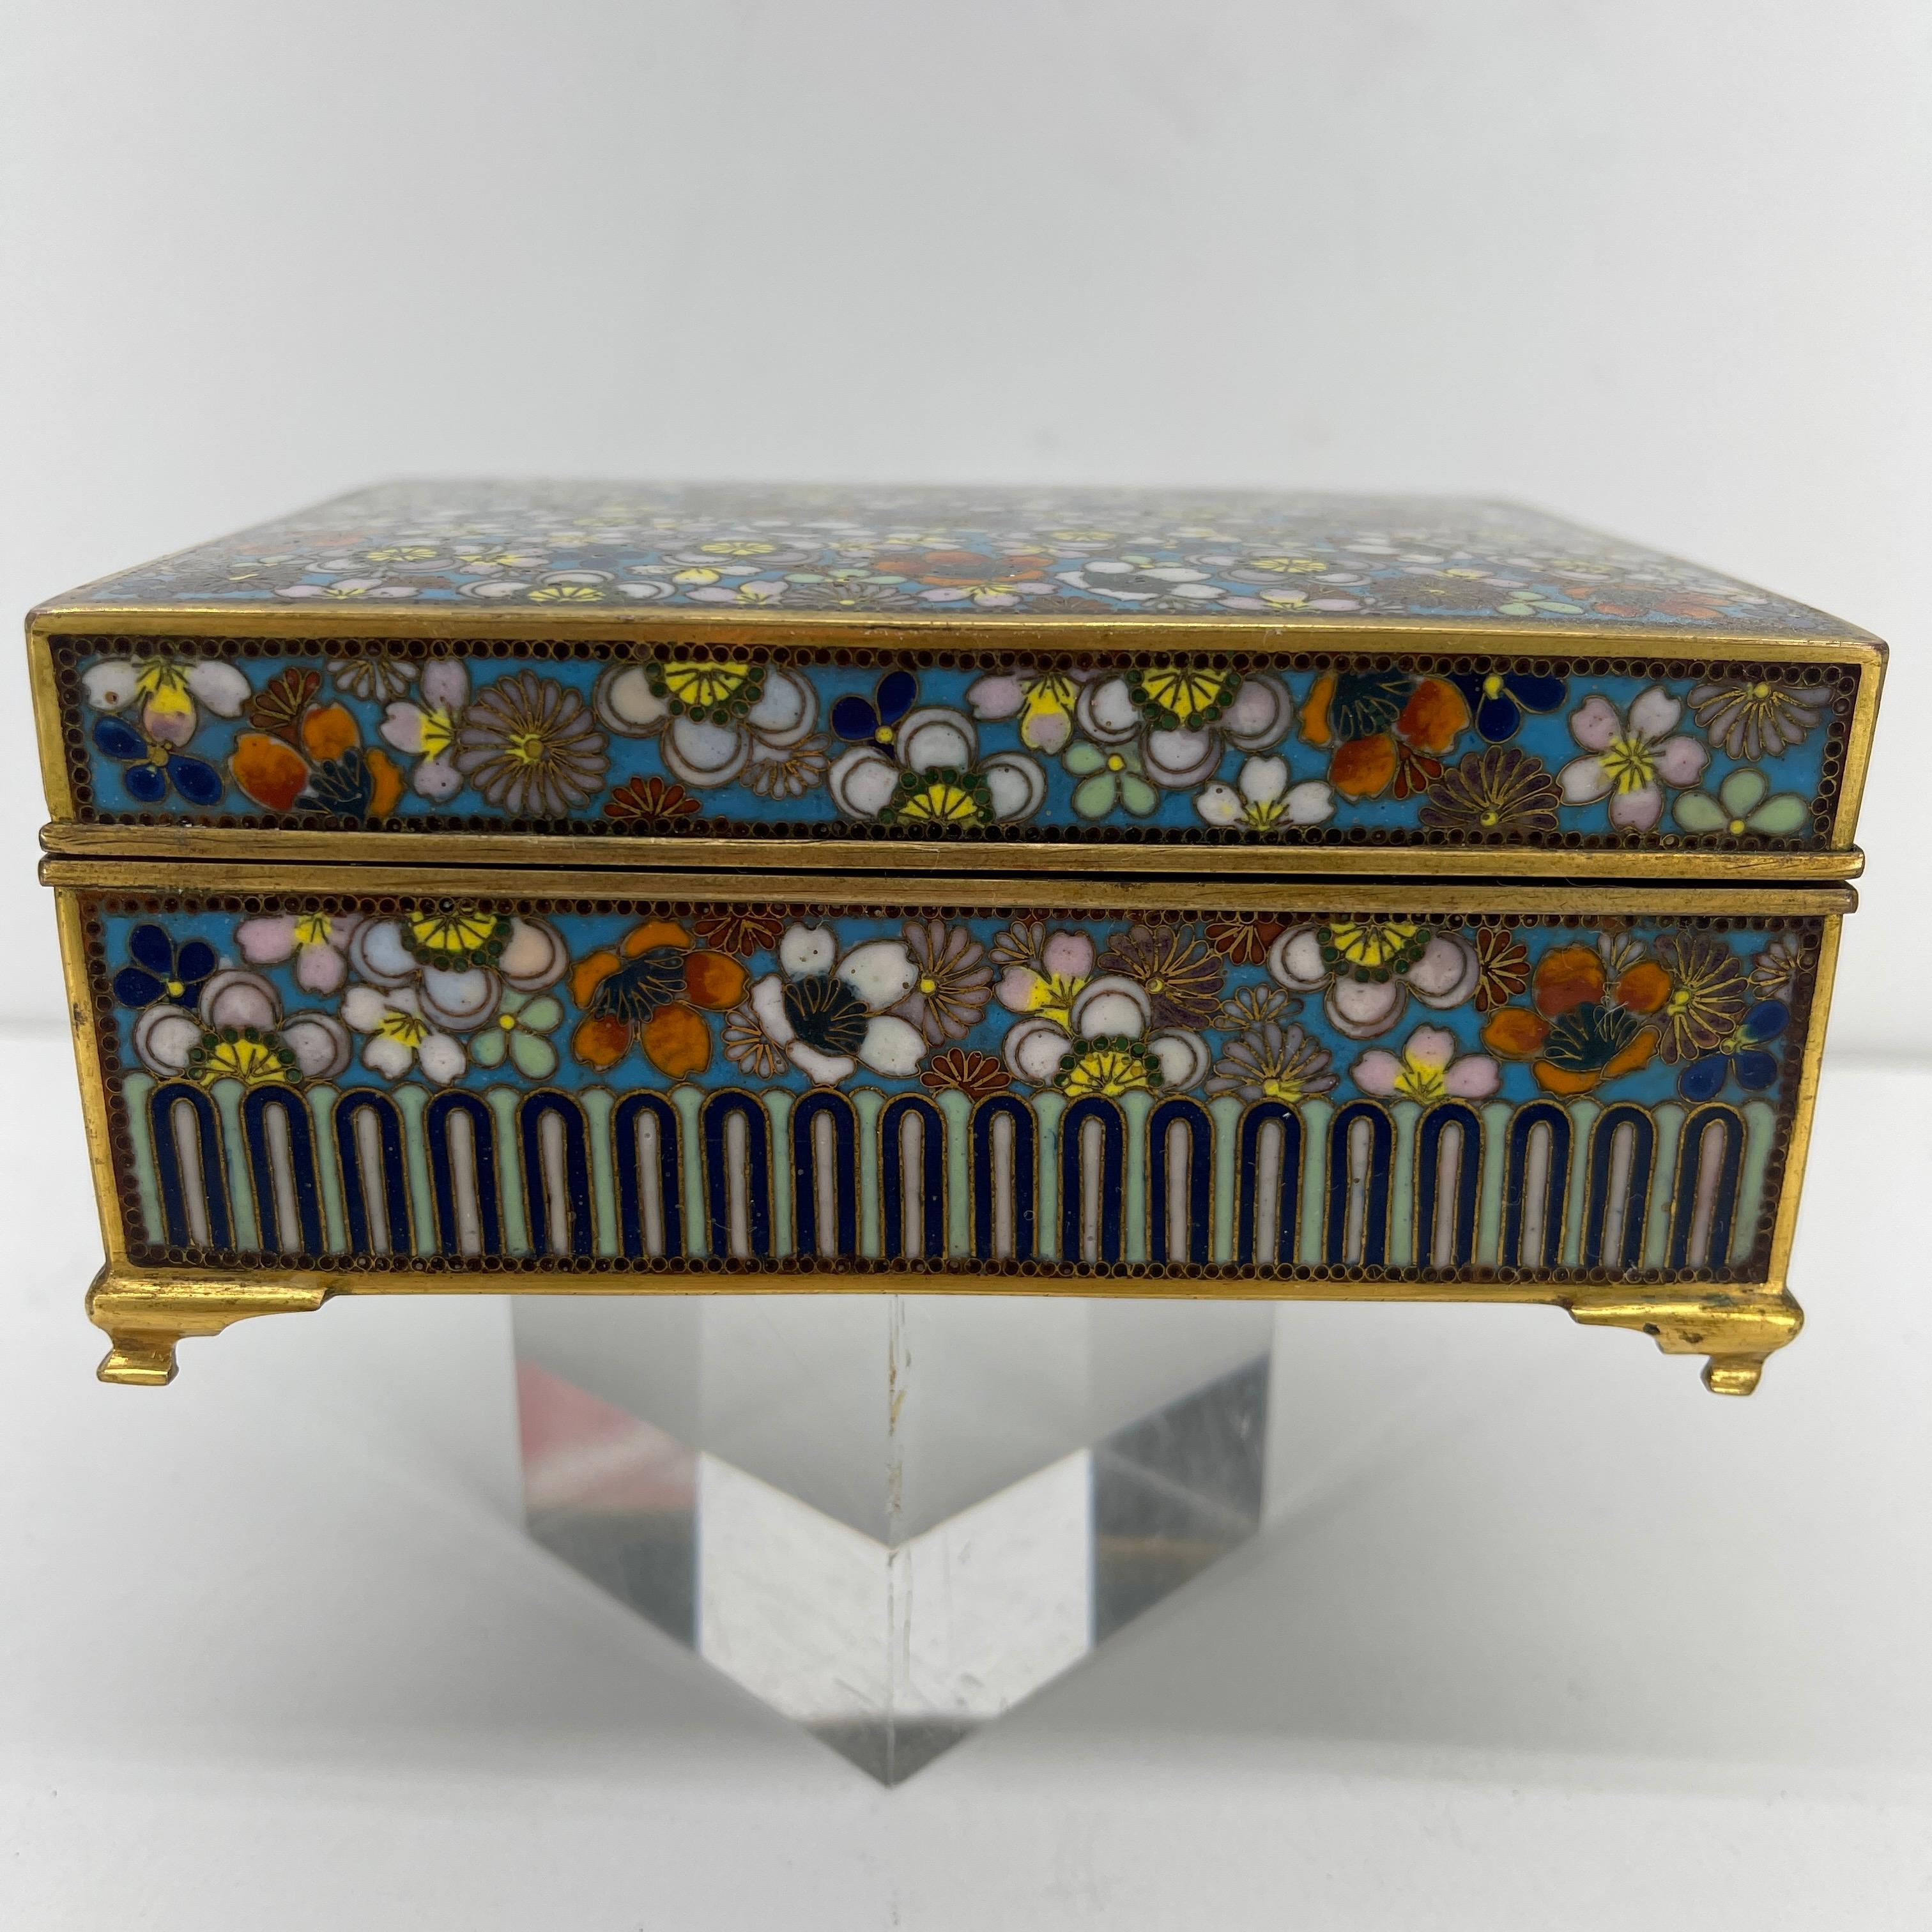 Japanese cloisonné jewelry box, circa 1960s. This beautiful vanity box has gilded delicate legs with petite rounded feet. It's rich floral design top on white enamel background is only enhanced with it's carved interior depicting Mt. Fuji engraved